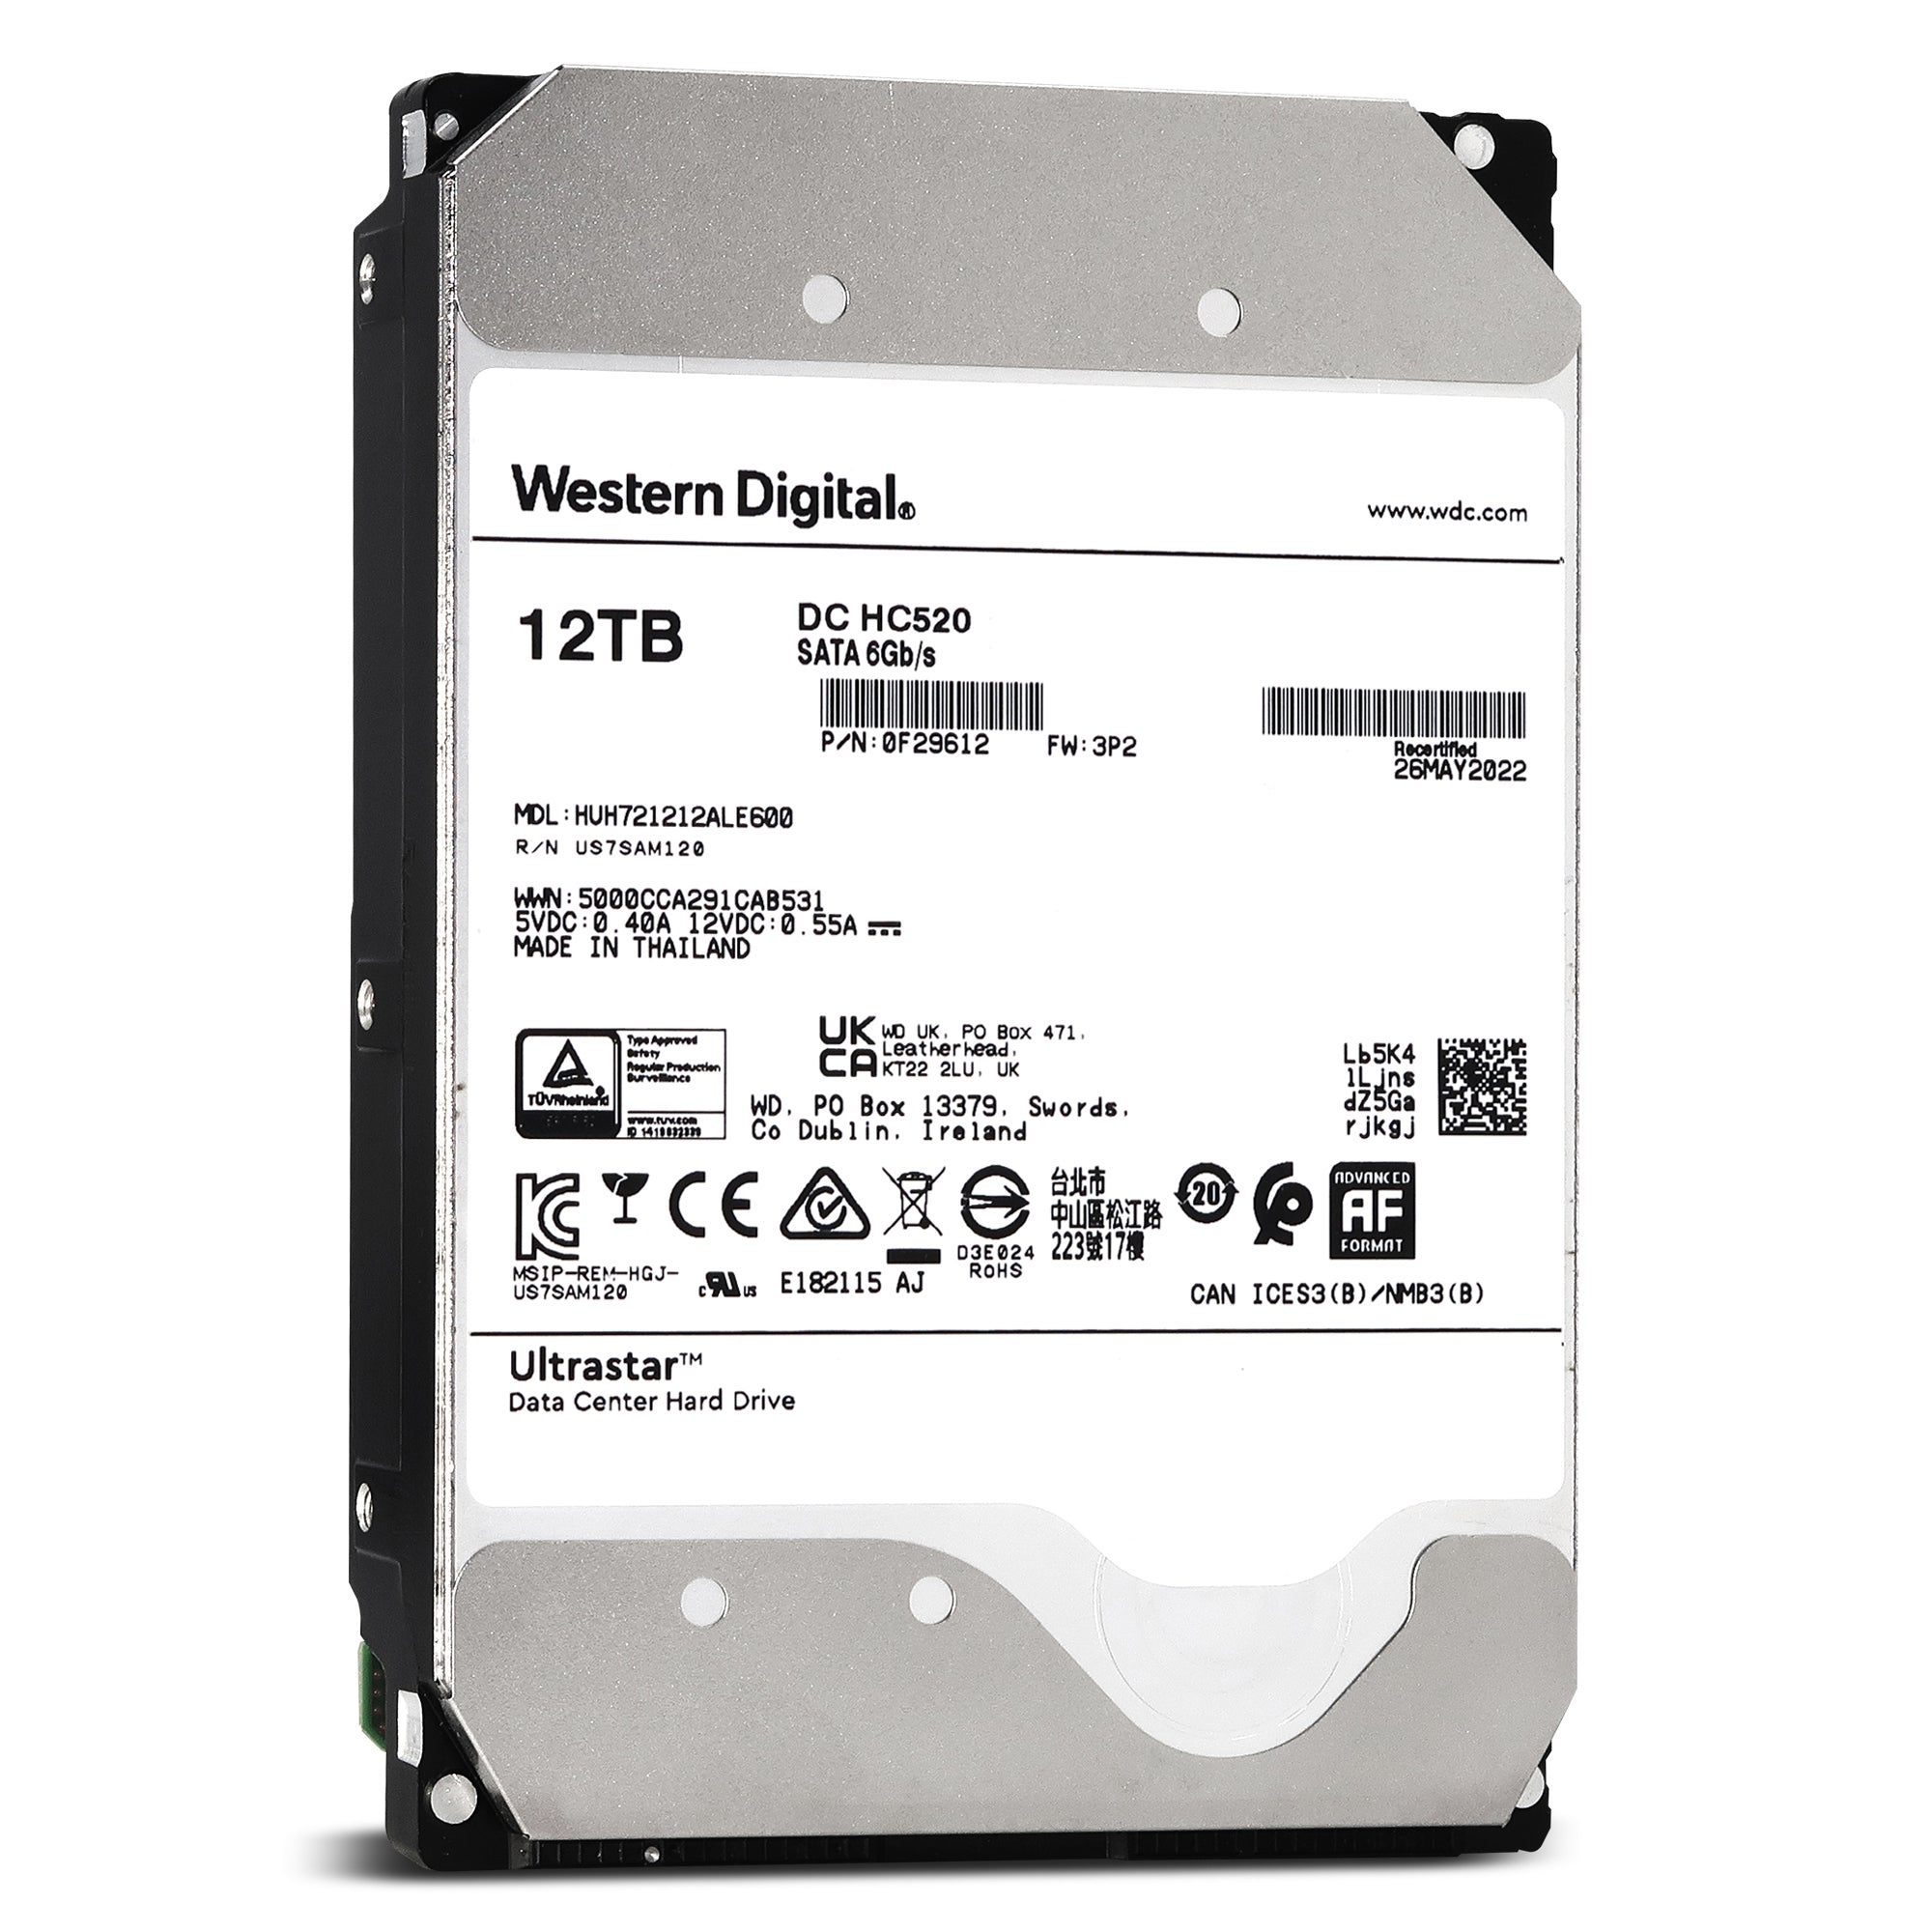 Western Digital Ultrastar DC HC520 HUH721212ALE600 0F29612 12TB 7.2K RPM SATA 6Gb/s 512e Power-Disable 3.5in Recertified Hard Drive - Front View